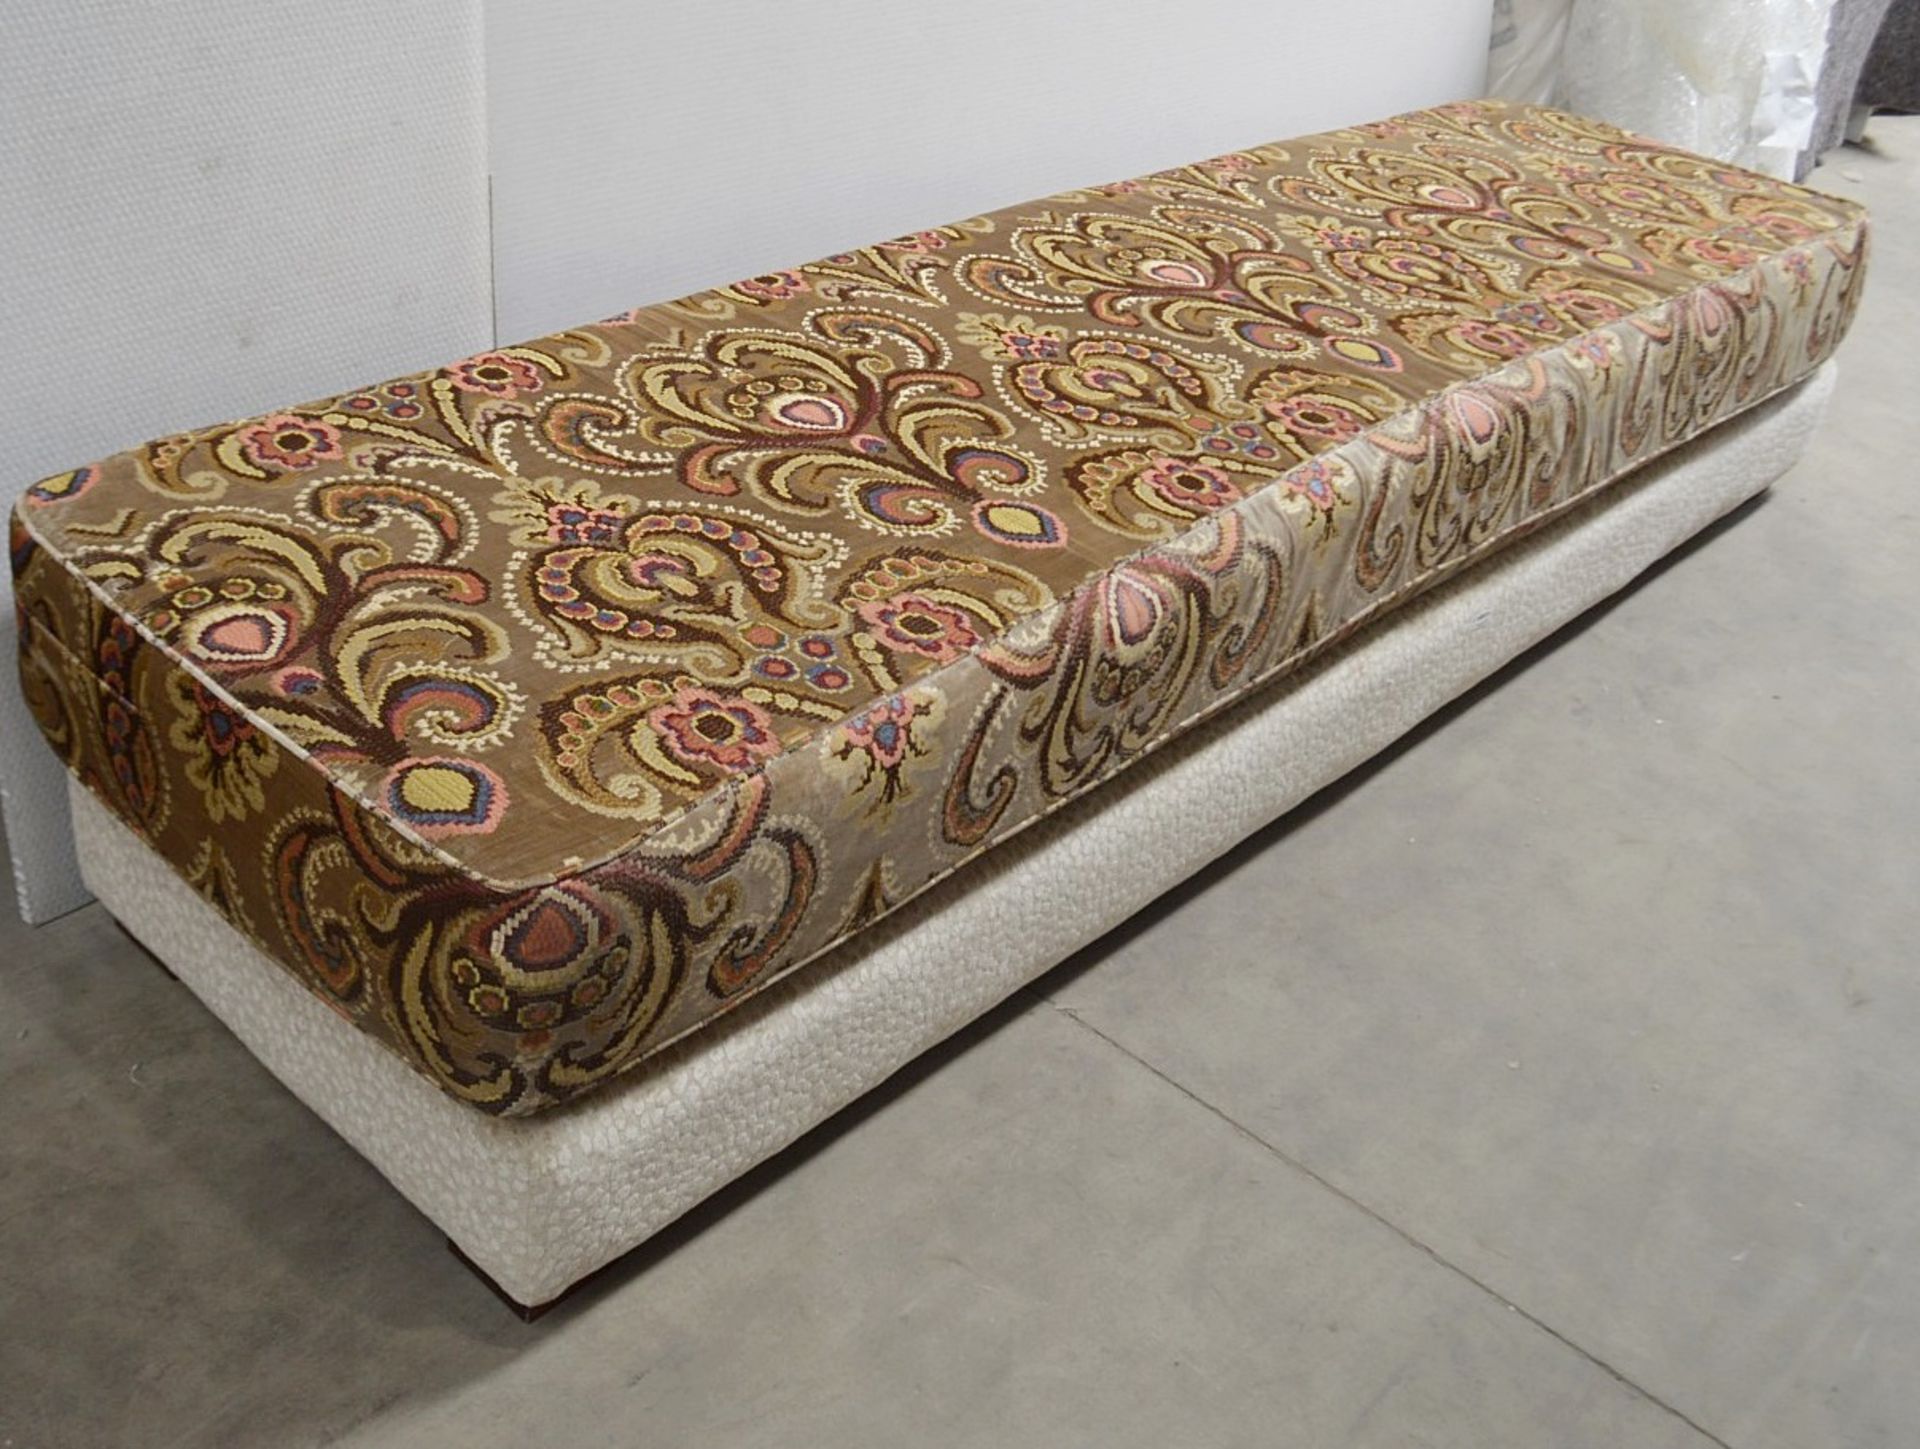 1 x Impressive 9ft Long Moroccan-style Seating Bench With Matching Footstool And 6 x Scatter - Image 5 of 9